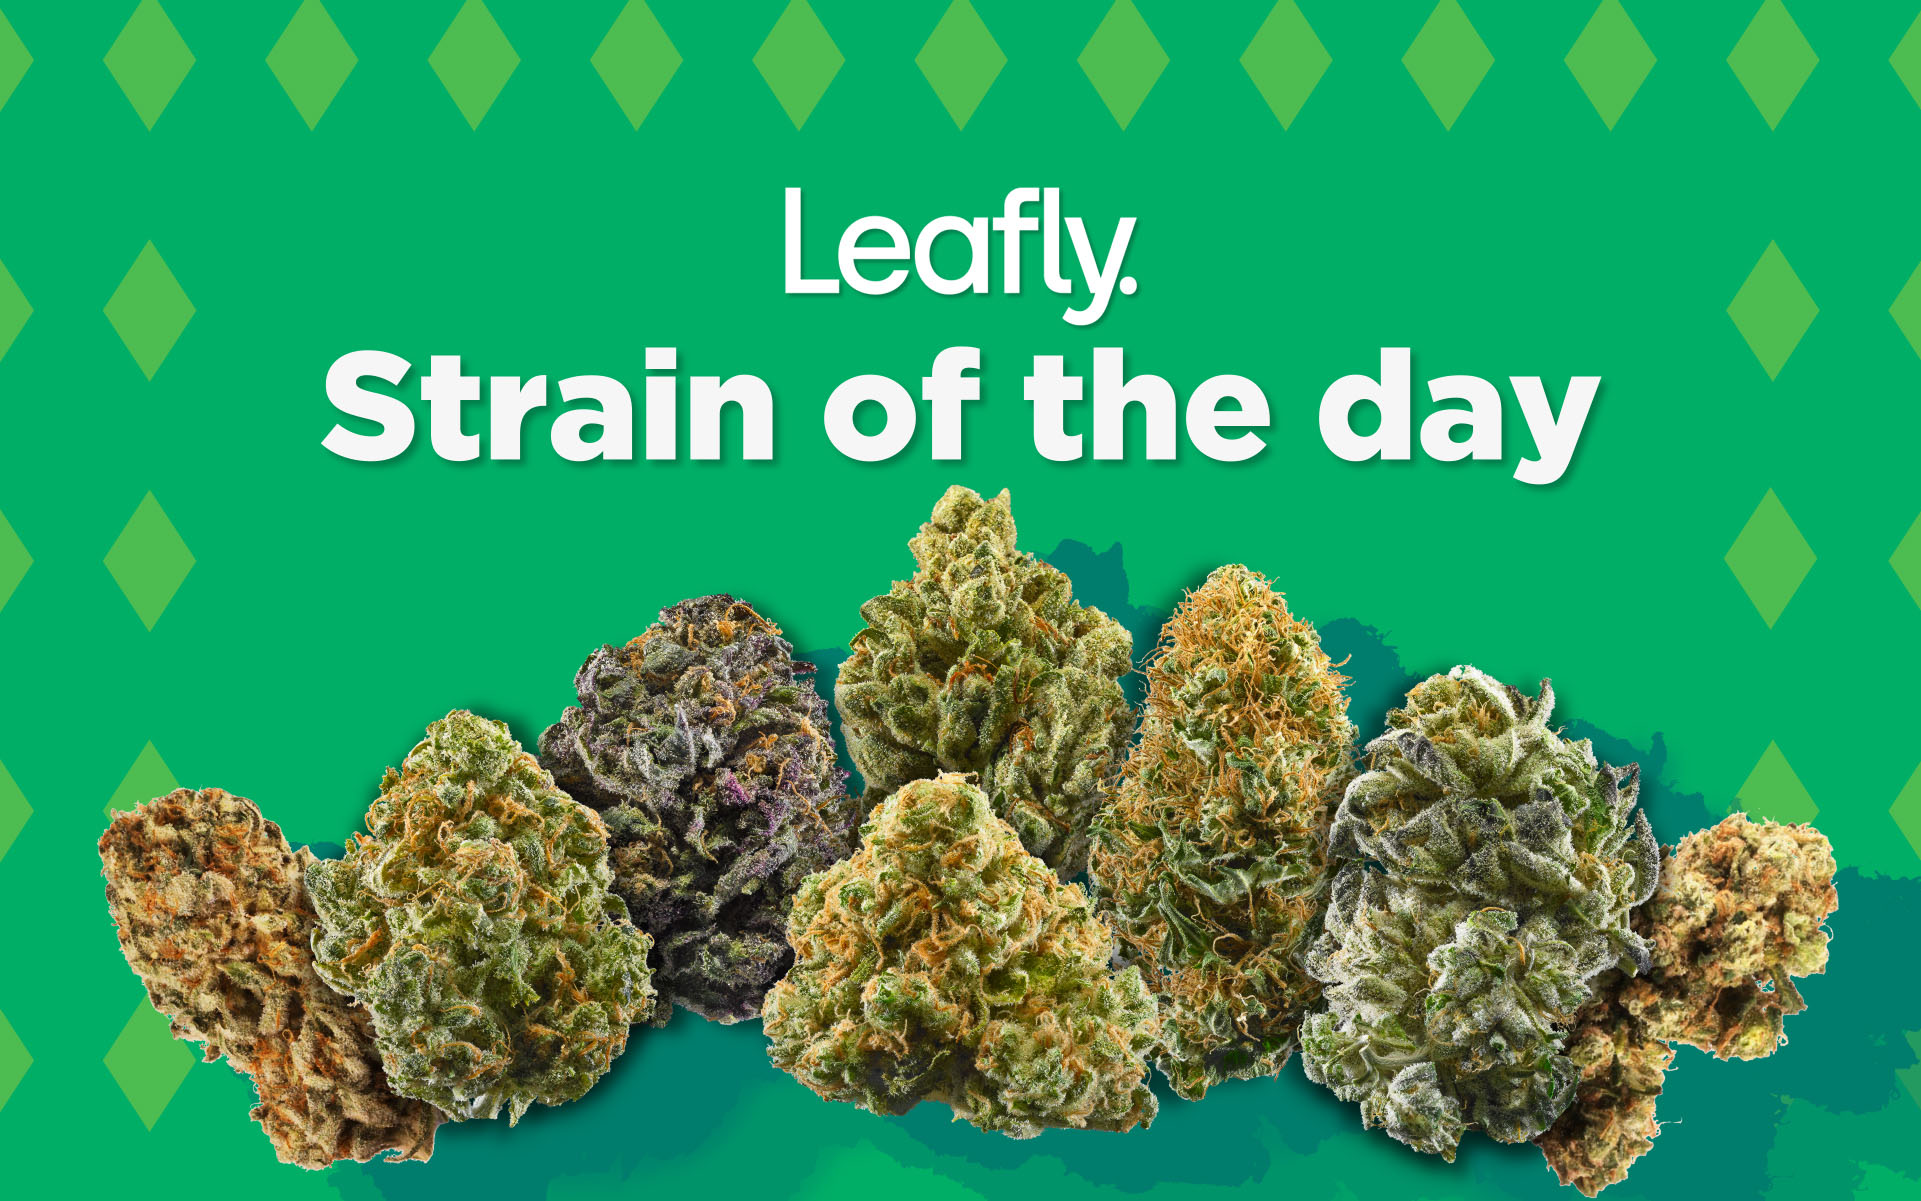 Leafly's cannabis strain of the day for the month of 420 Leafly